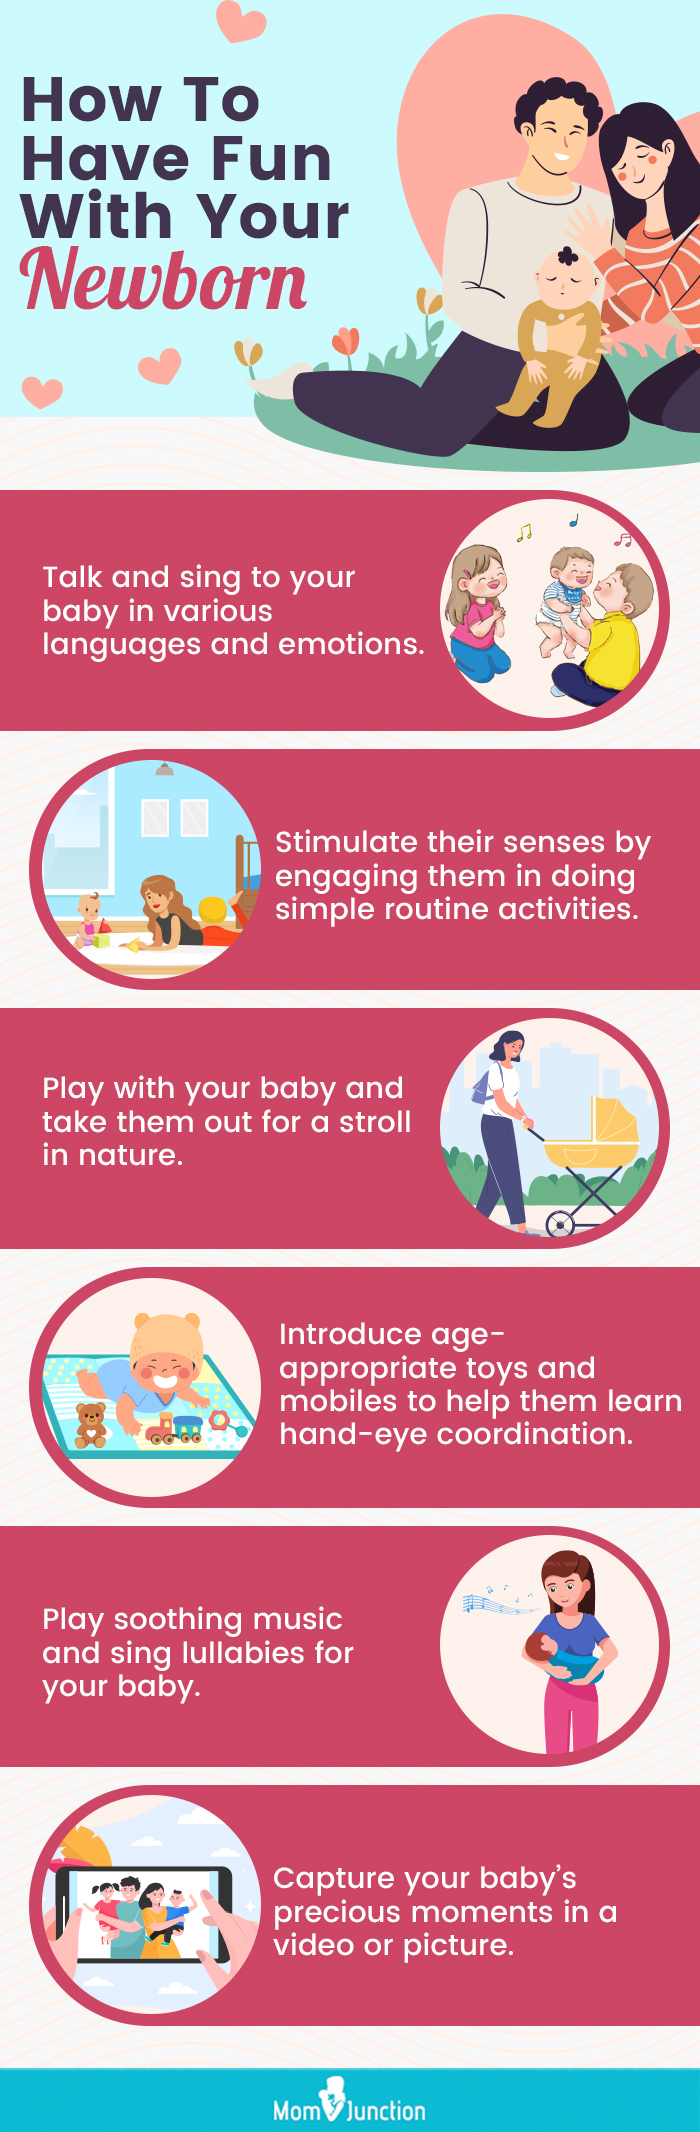 how to have fun with your newborn (infographic)